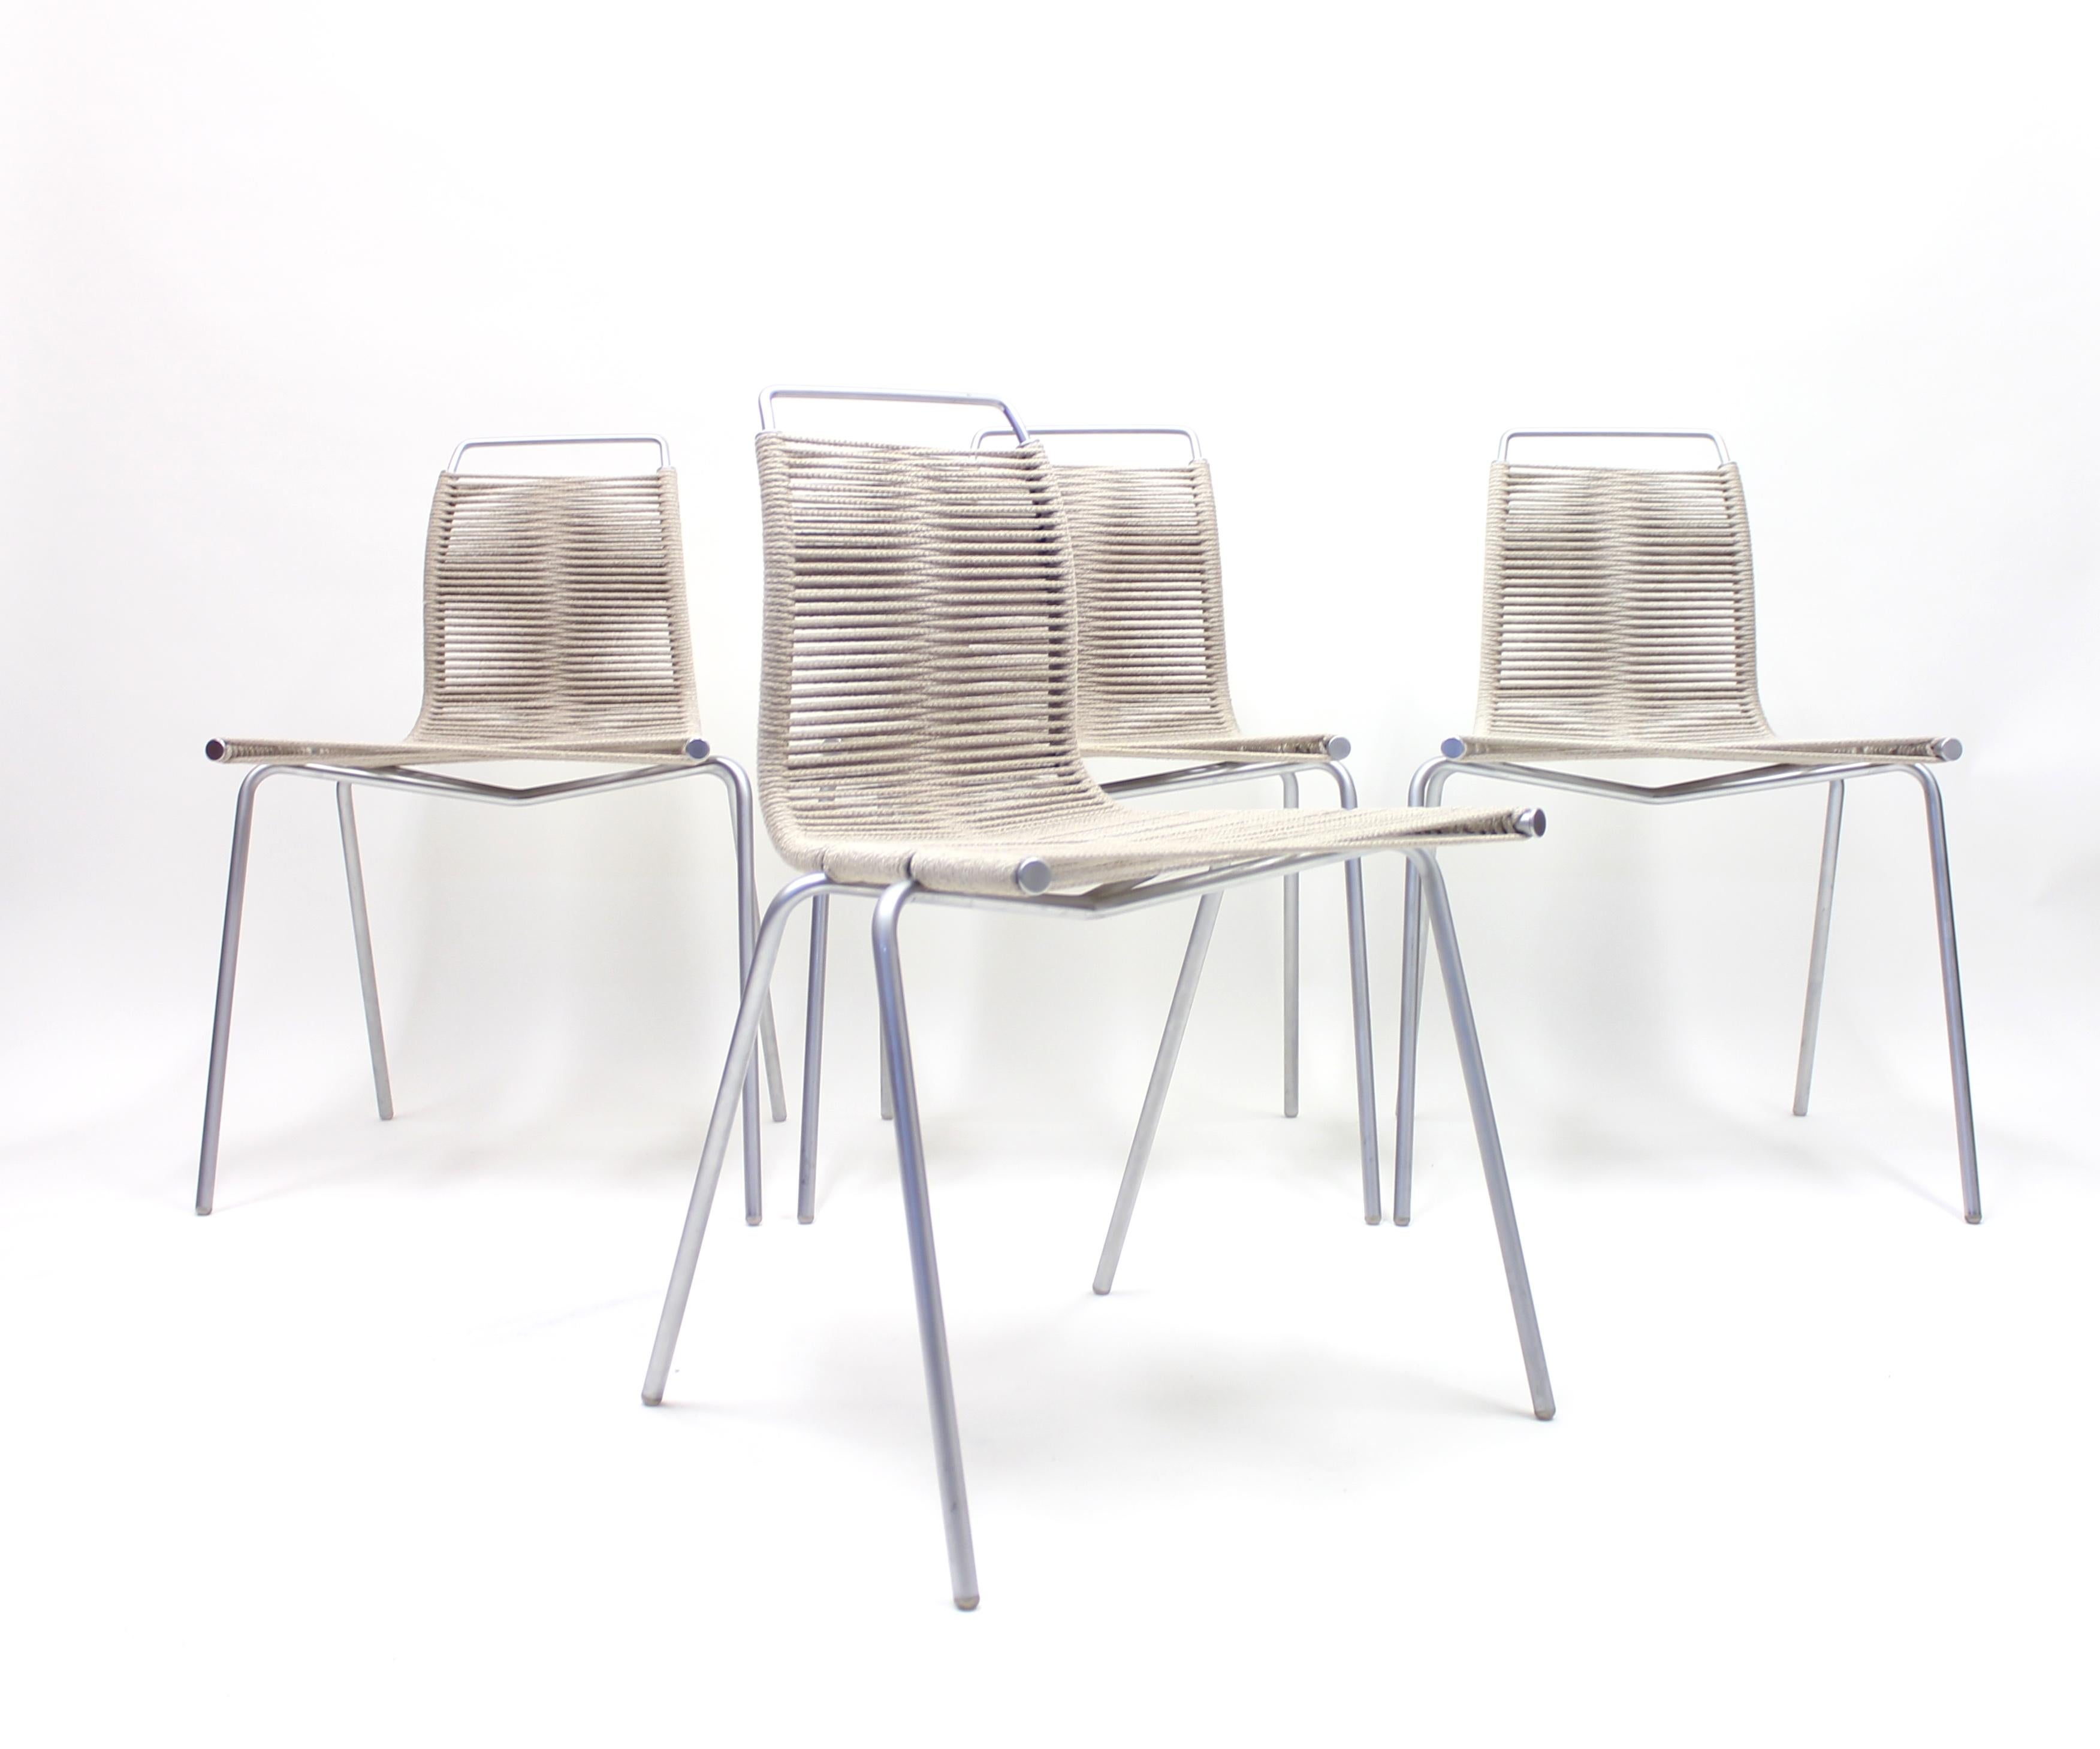 Mid-20th Century PK1 Chairs by Poul Kjærholm for Thorsen Møbler, Set of 4